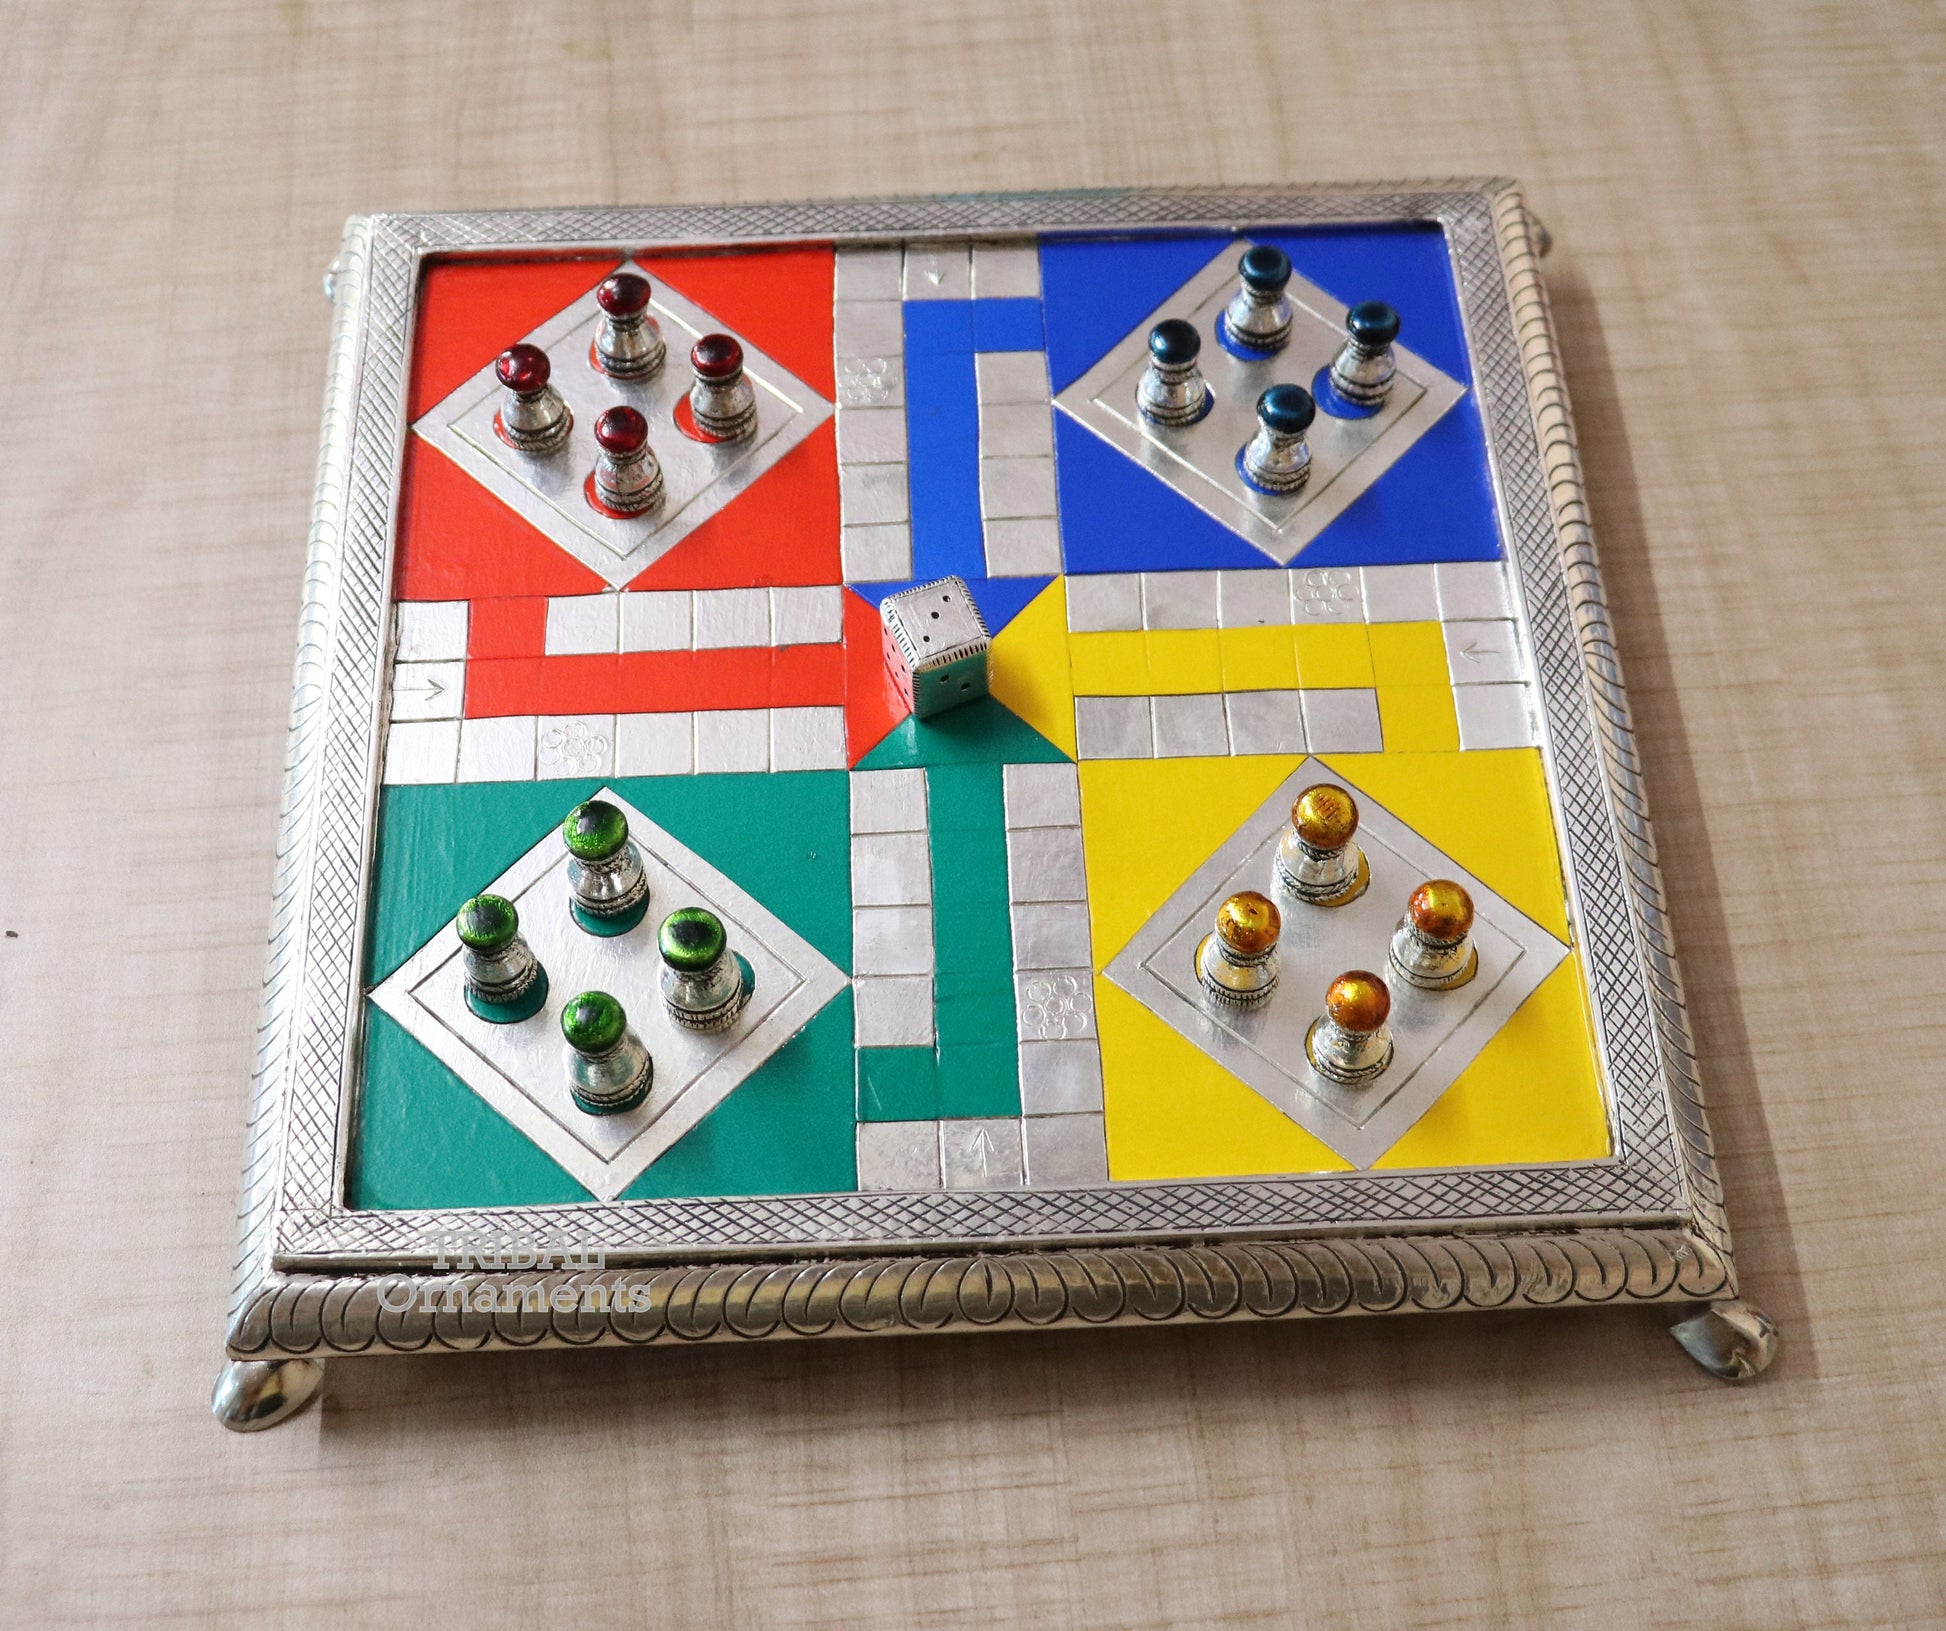 Pure 925 sterling silver handcrafted work LUDO Game board, Amazing handcrafted design on wooden base fabulous Royal silver article gift fr15 - TRIBAL ORNAMENTS